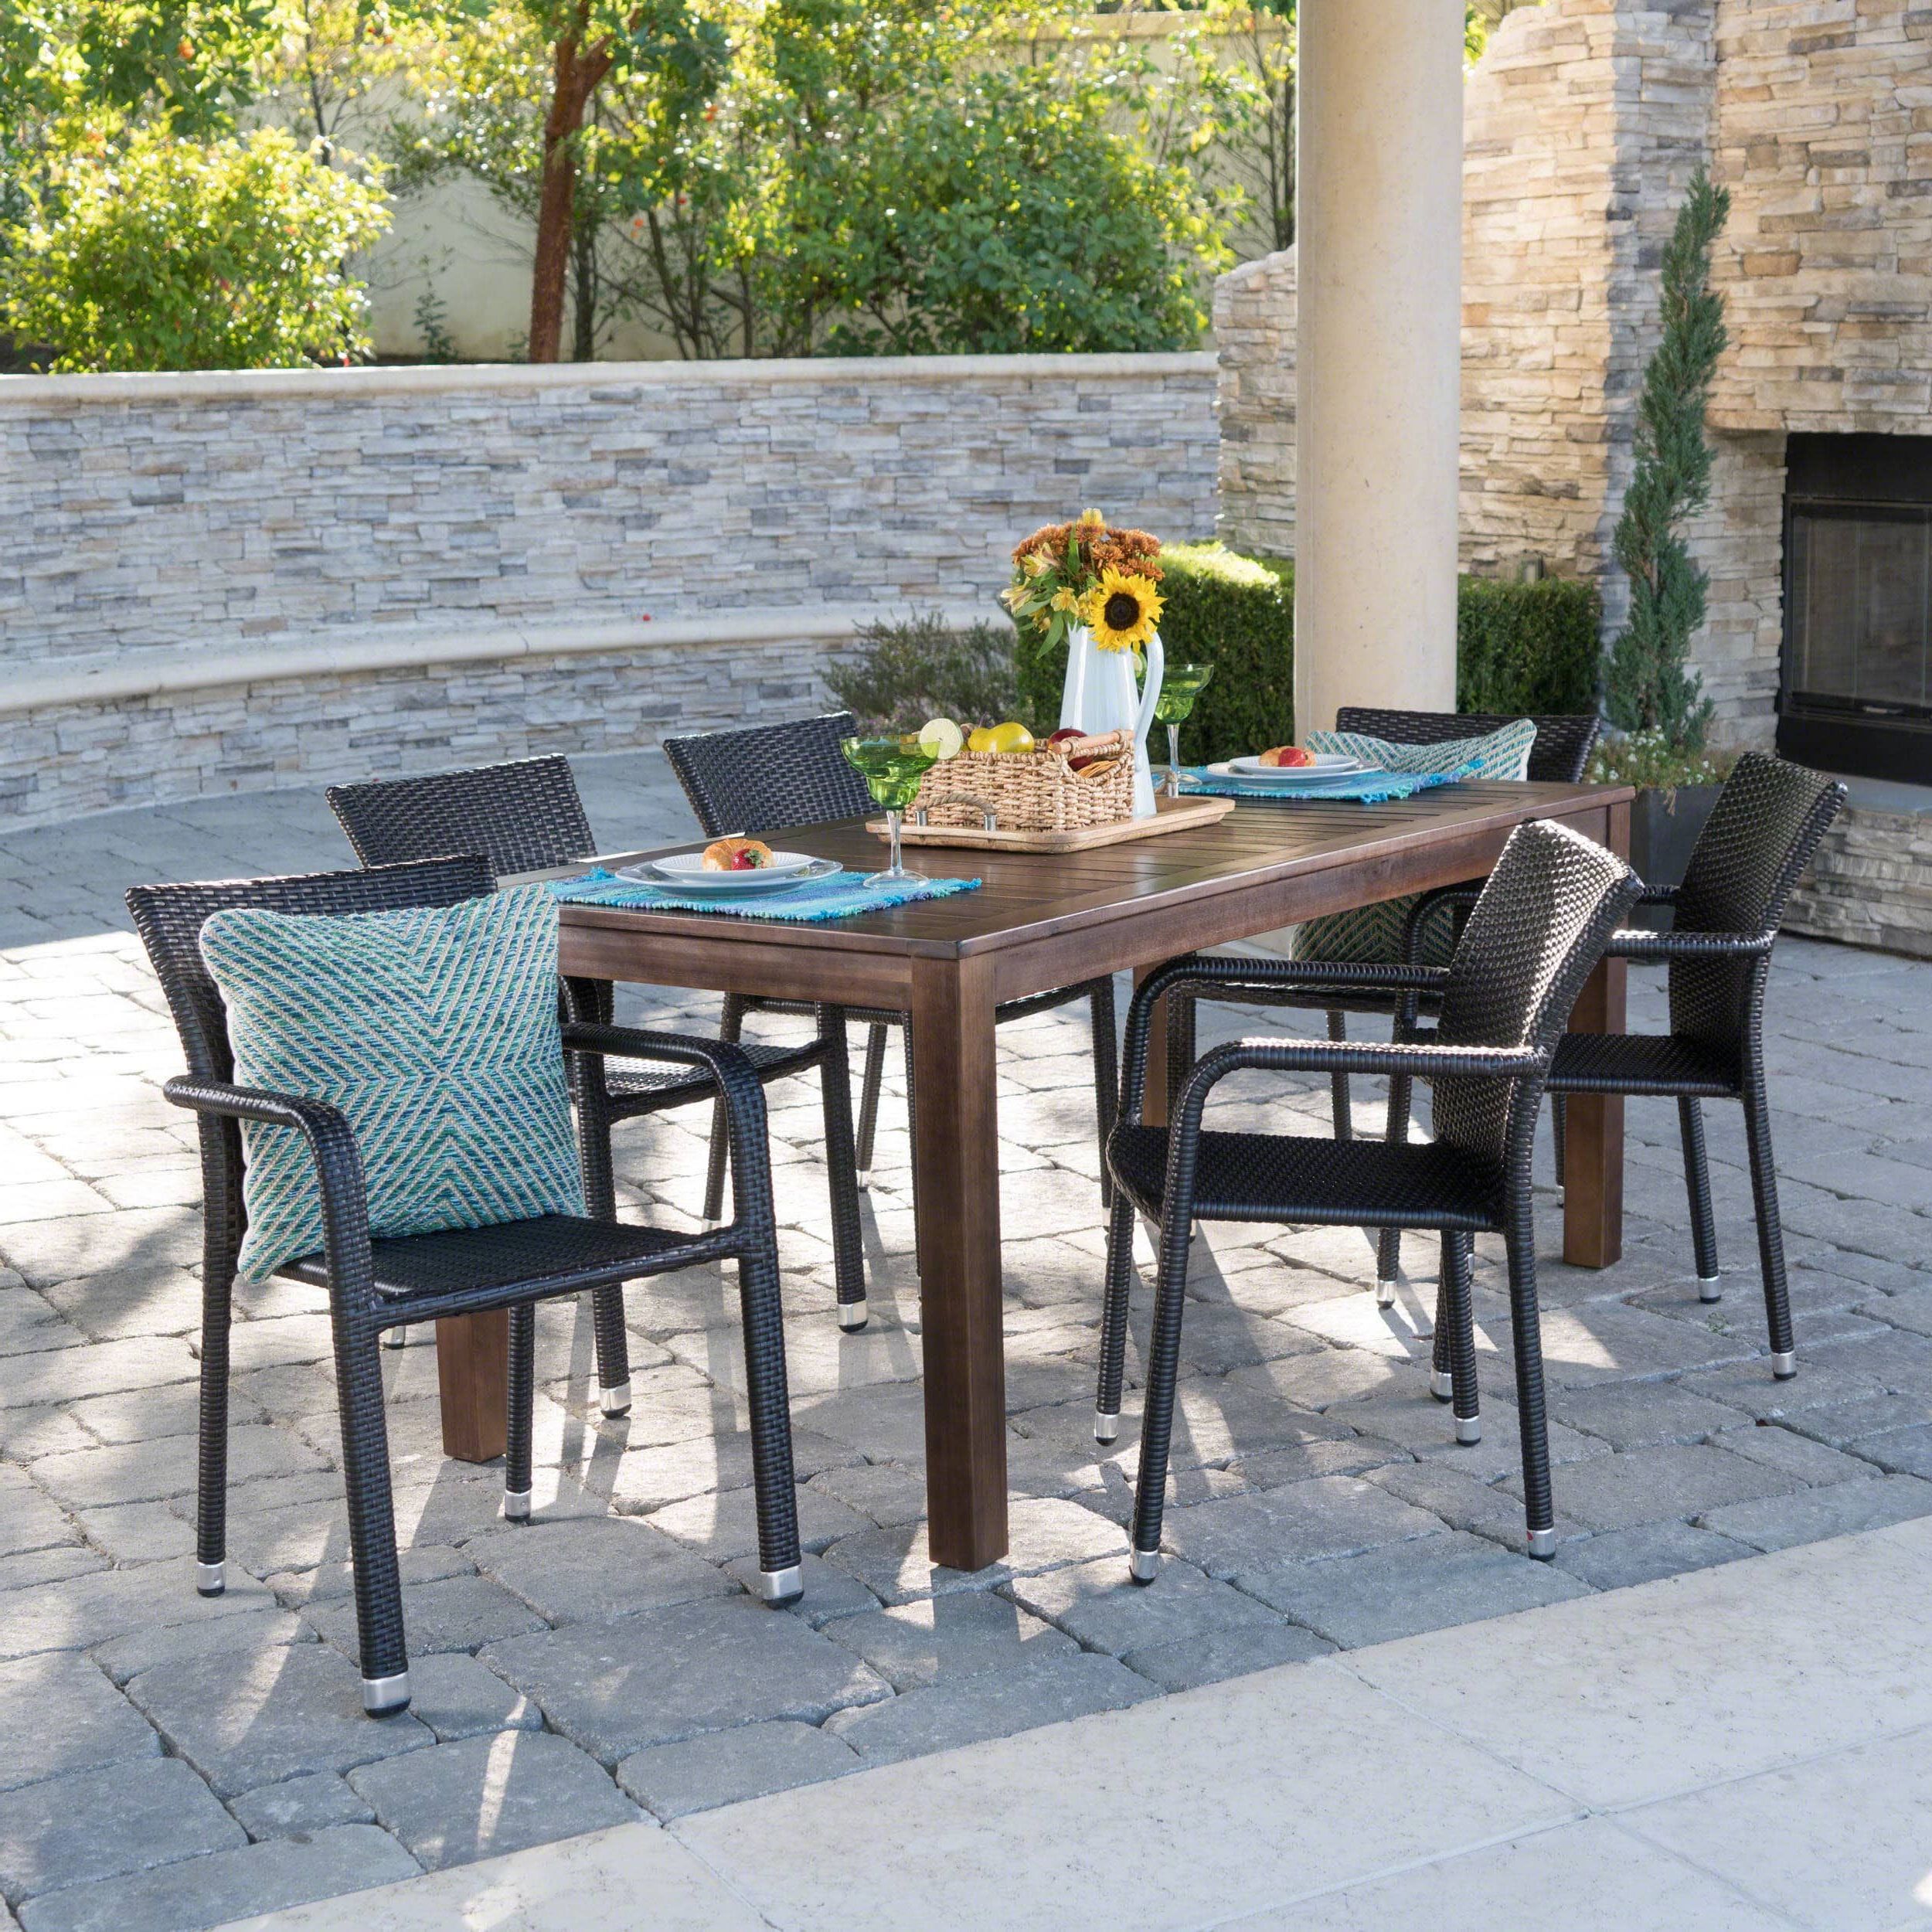 Fashionable Brown Wicker Rectangular Patio Dining Sets Regarding Newcastle Outdoor 7 Piece Rectangle Aluminum Wicker Wood Dining Set (View 10 of 15)